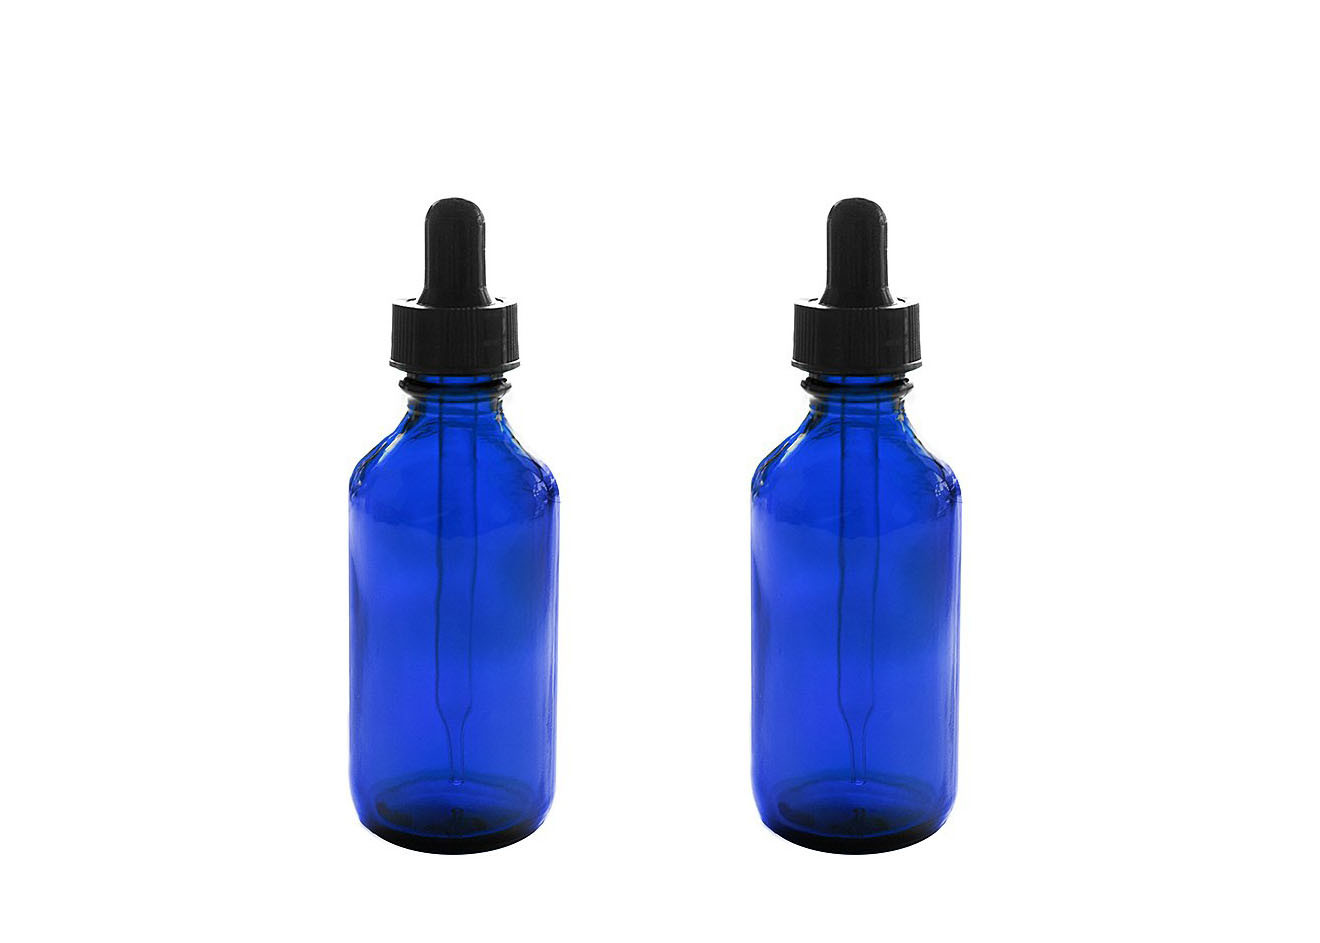 Blue Empty Essential Oil Bottles  Storing Perfumes Chemistry Chemicals